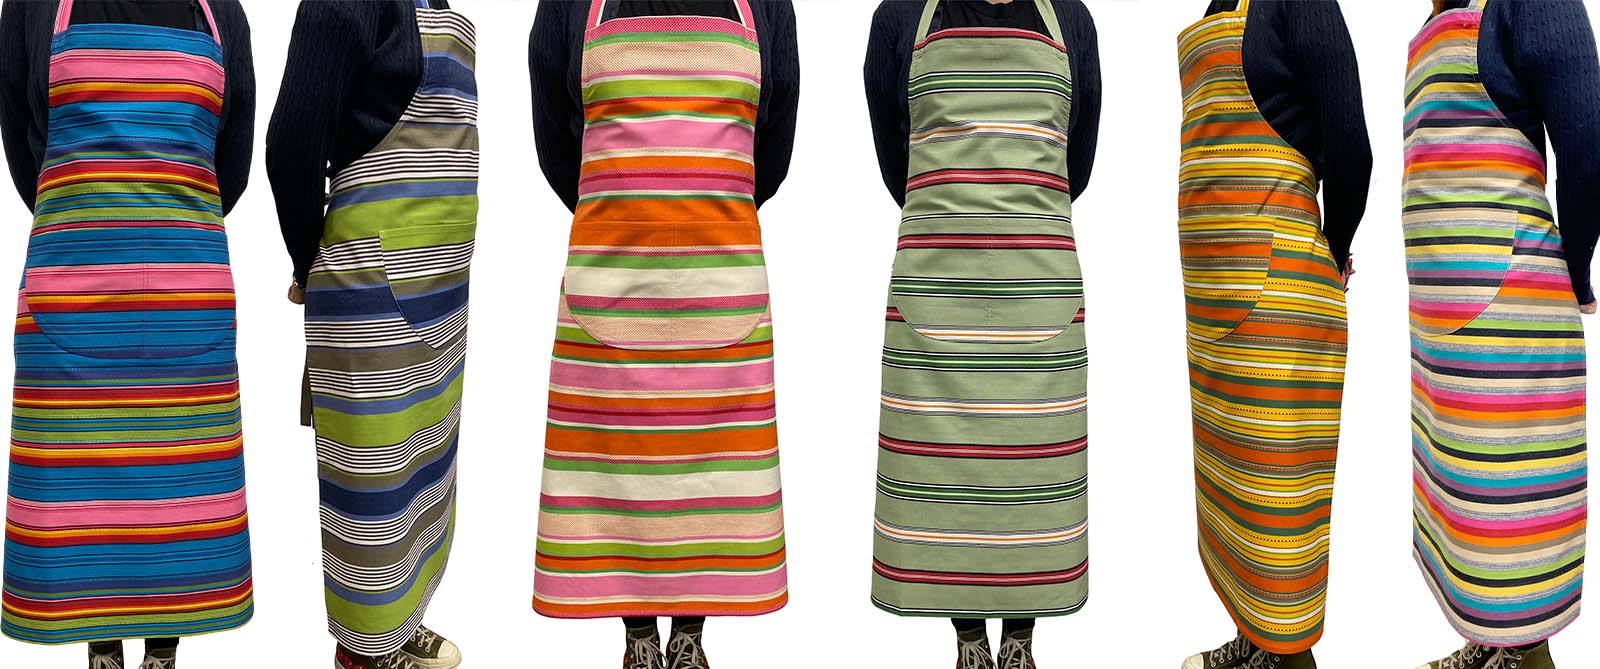 Blue Pink Striped Aprons